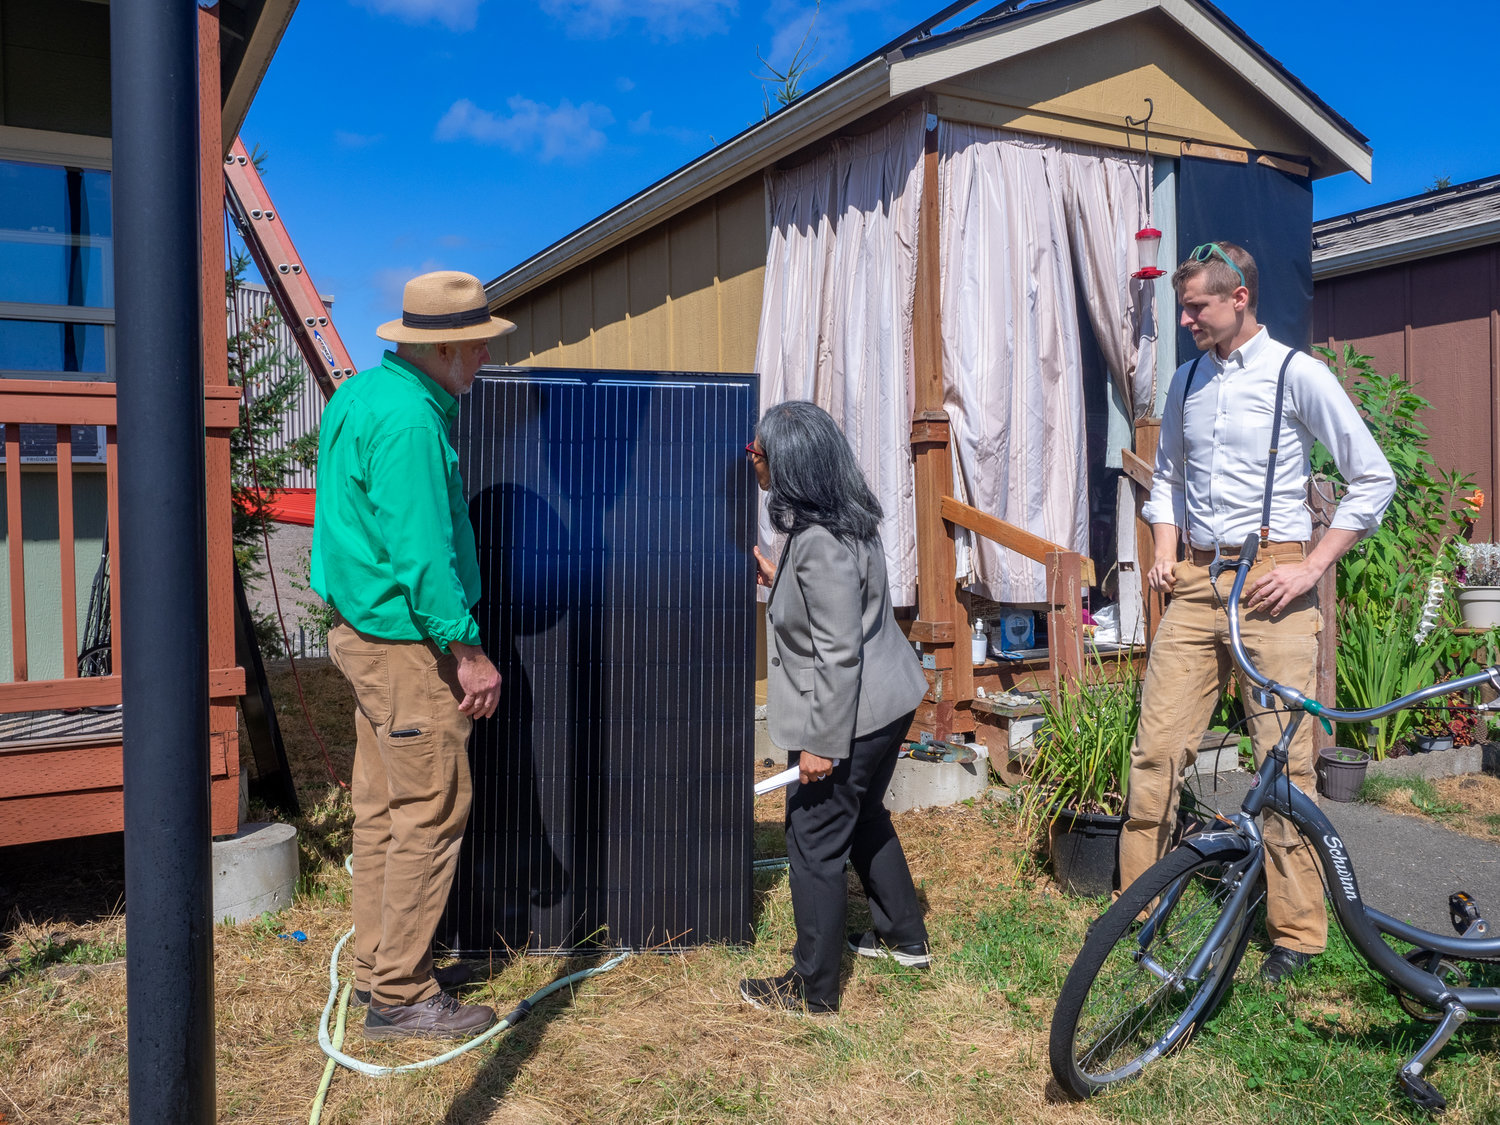 Kirk Haffner, president of South Sound Solar, talks with Congresswoman Strickland and , Mason Rolph of Olympia Community Solar about the installation at Quixote Village on August 2, 2022.